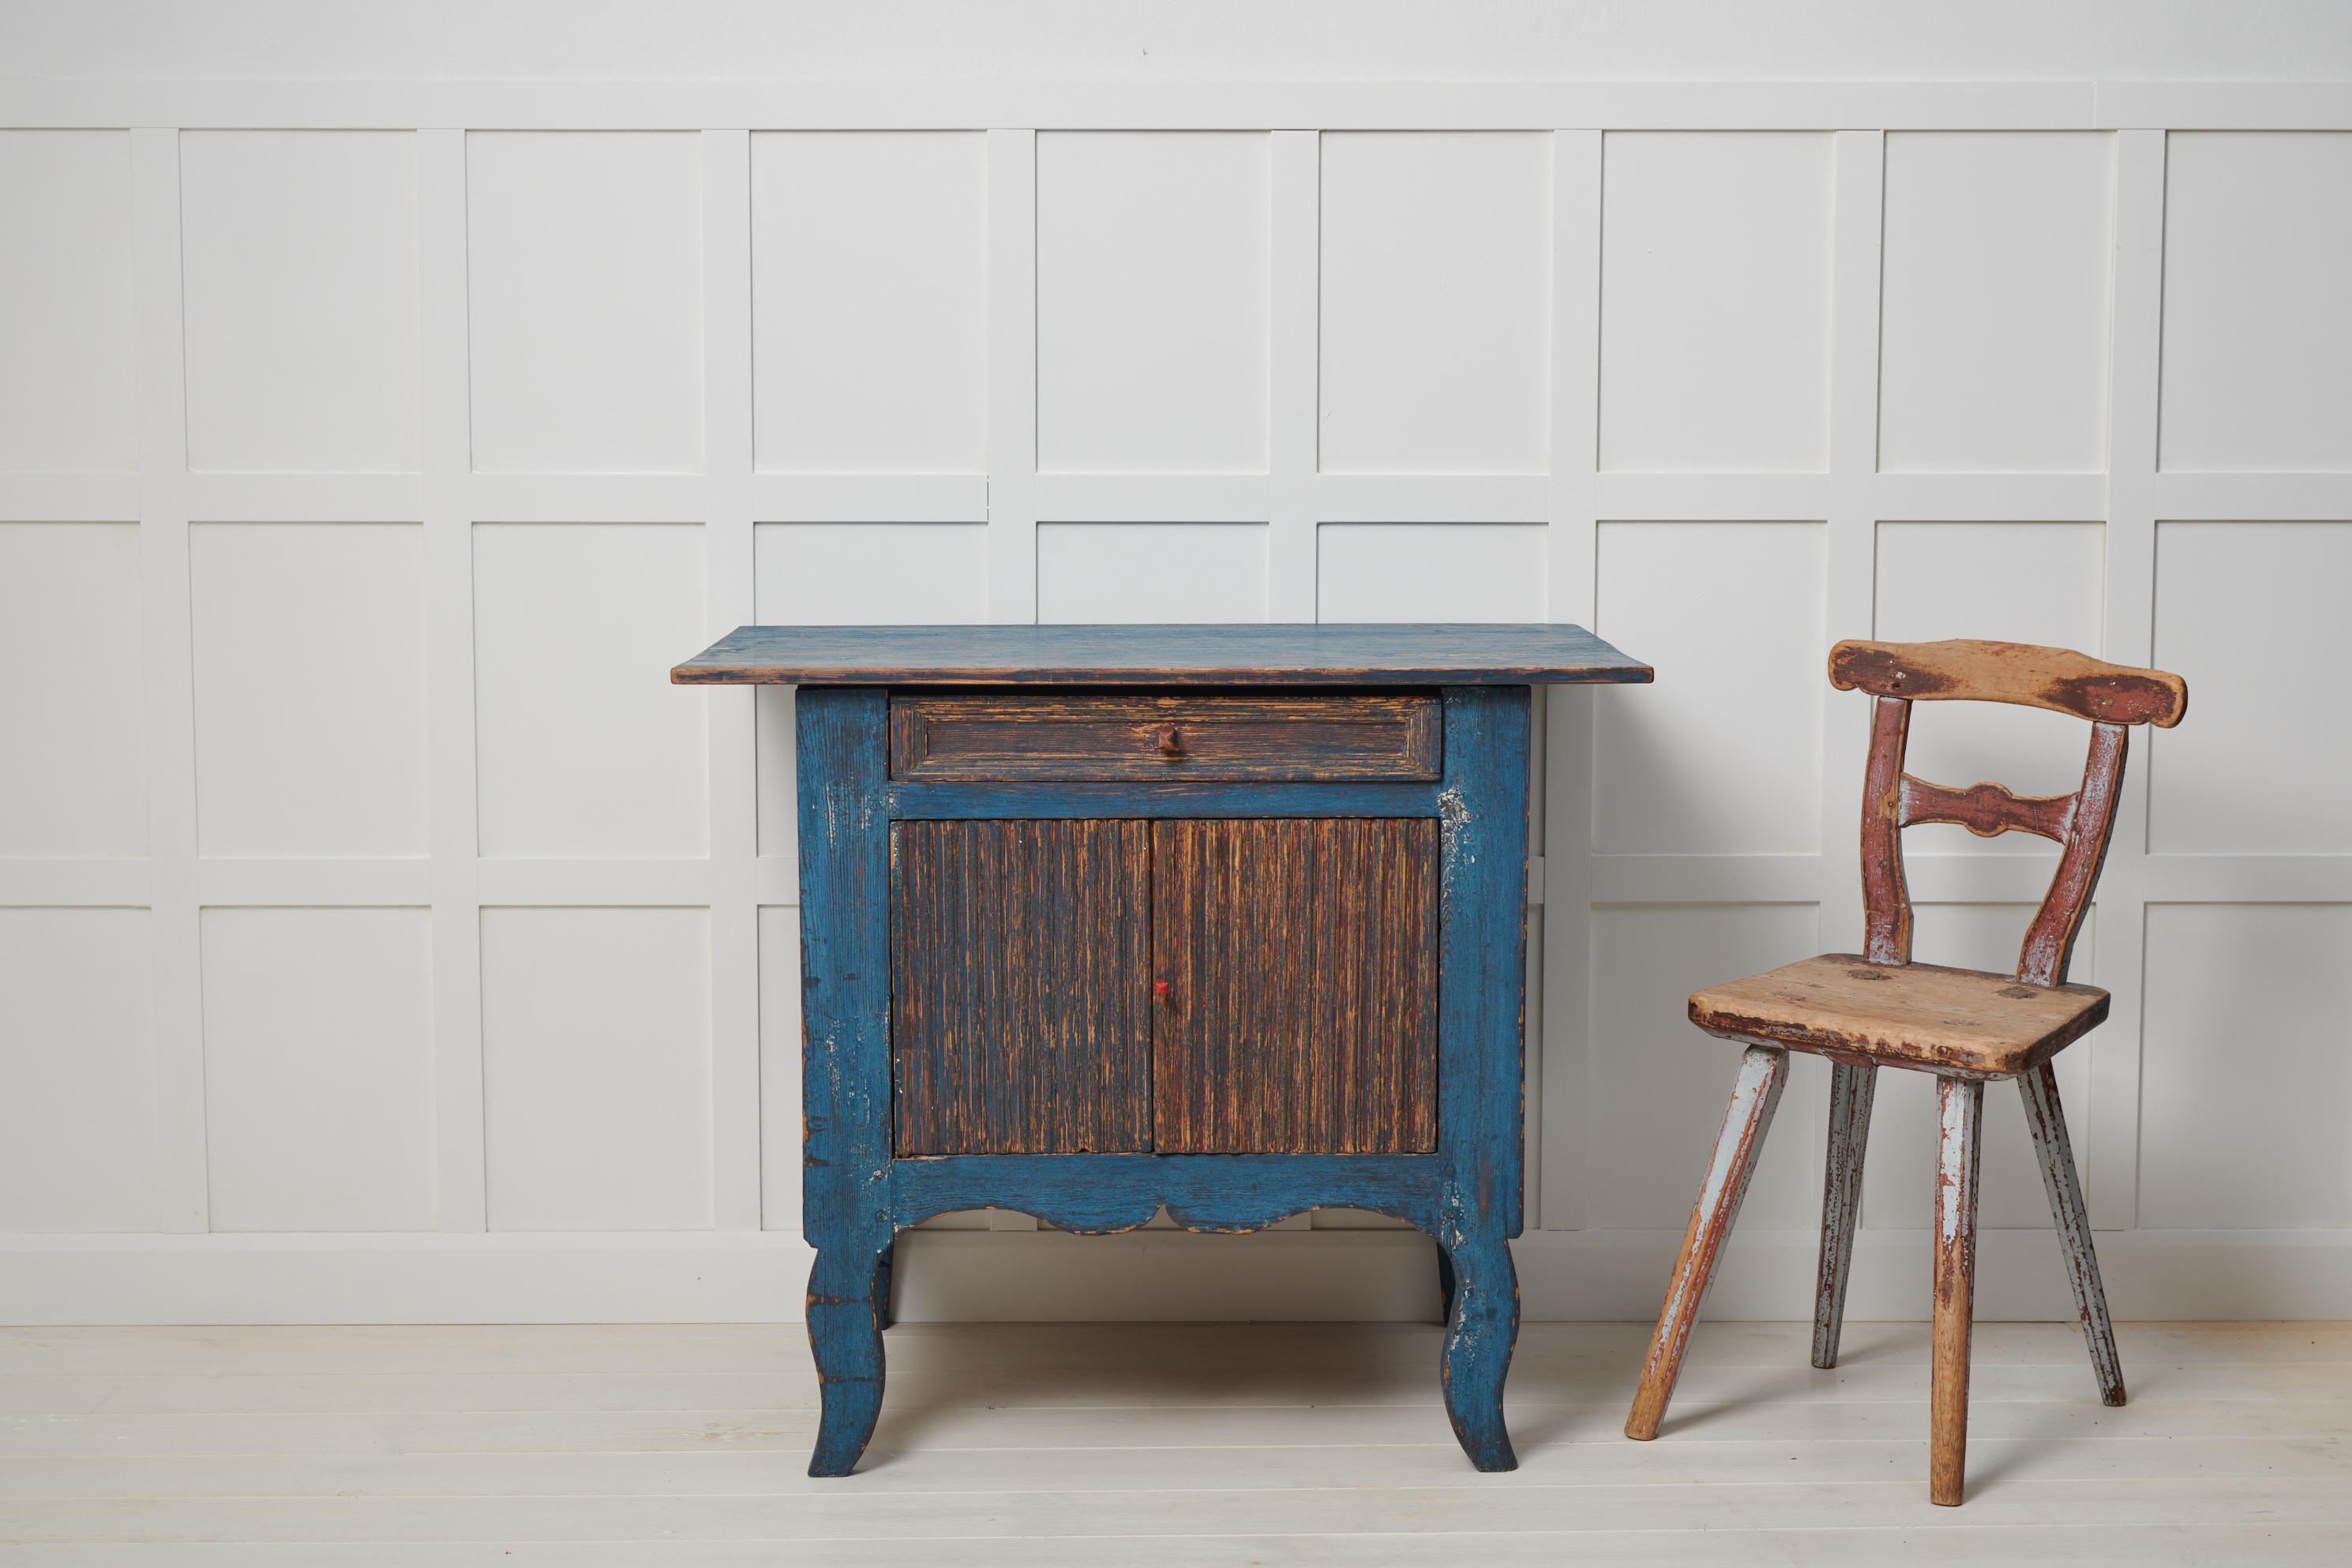 Antique Swedish small sideboard in folk art from an area called Hälsingland. Locally in Hälsingland this type of sideboard is also known as ”mössbord” or ”hat table” in English. Made by hand in solid pine around 1820. The sideboard has the original